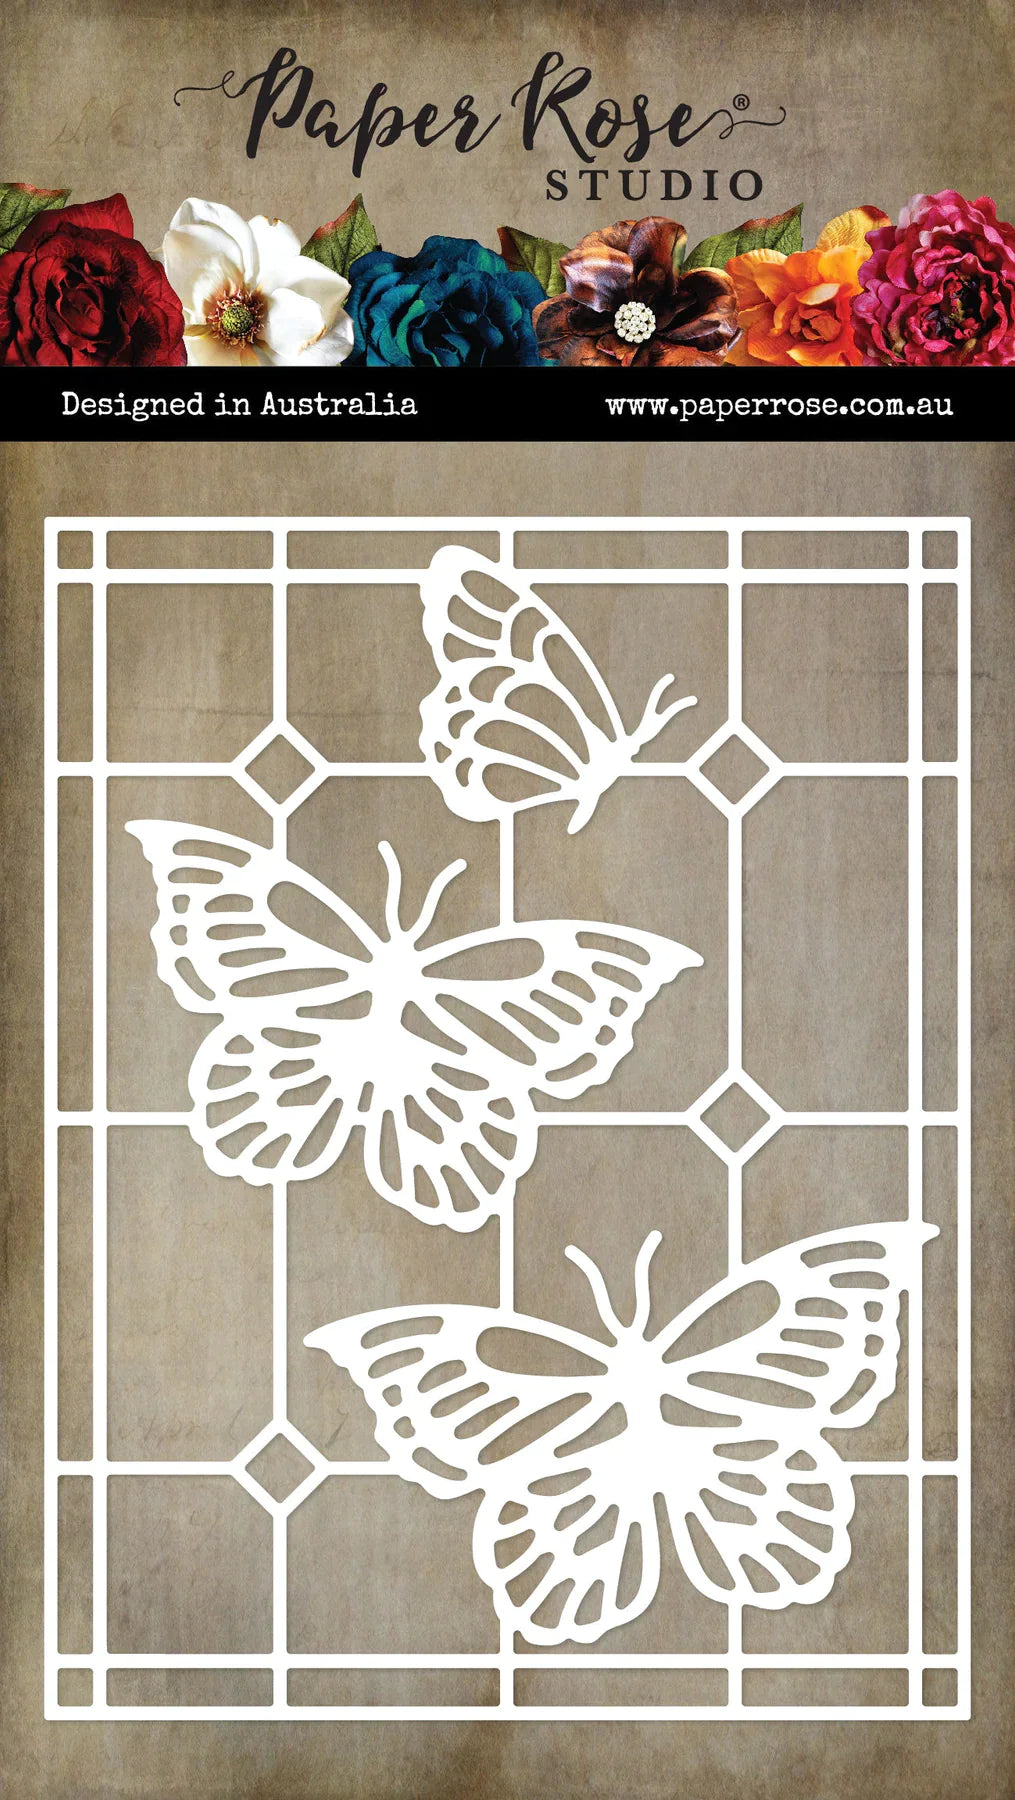 Alora Butterfly Stained Glass Coverplate Metal Die 31617